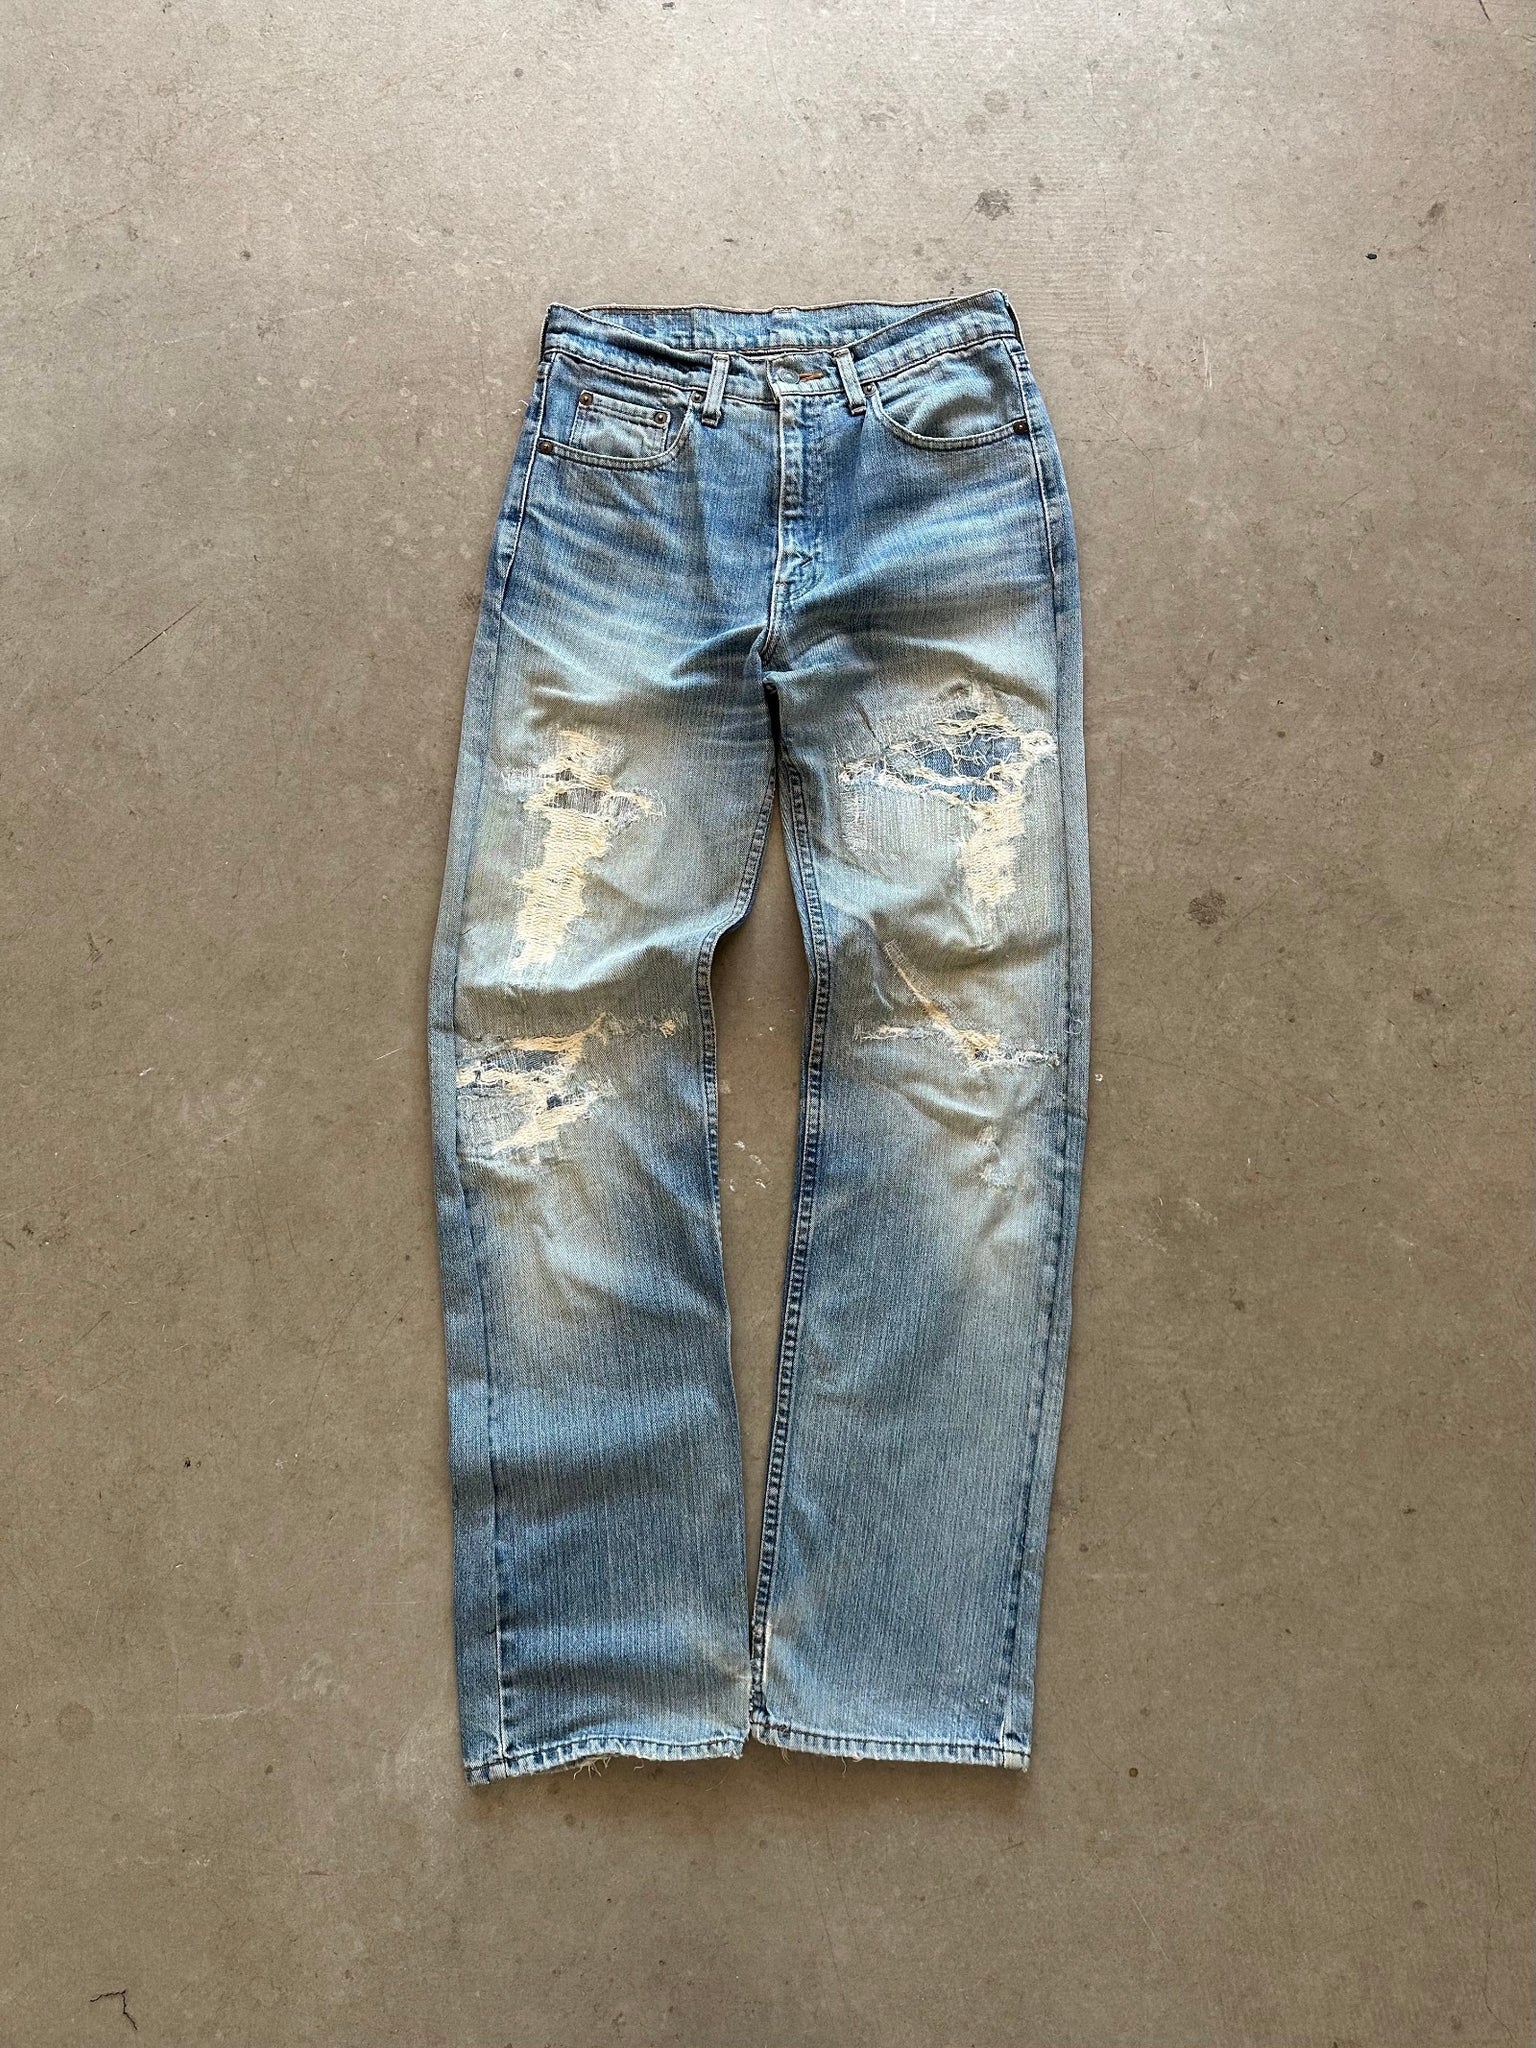 1994 Levi's 512 Repaired Jeans - 30 x 34